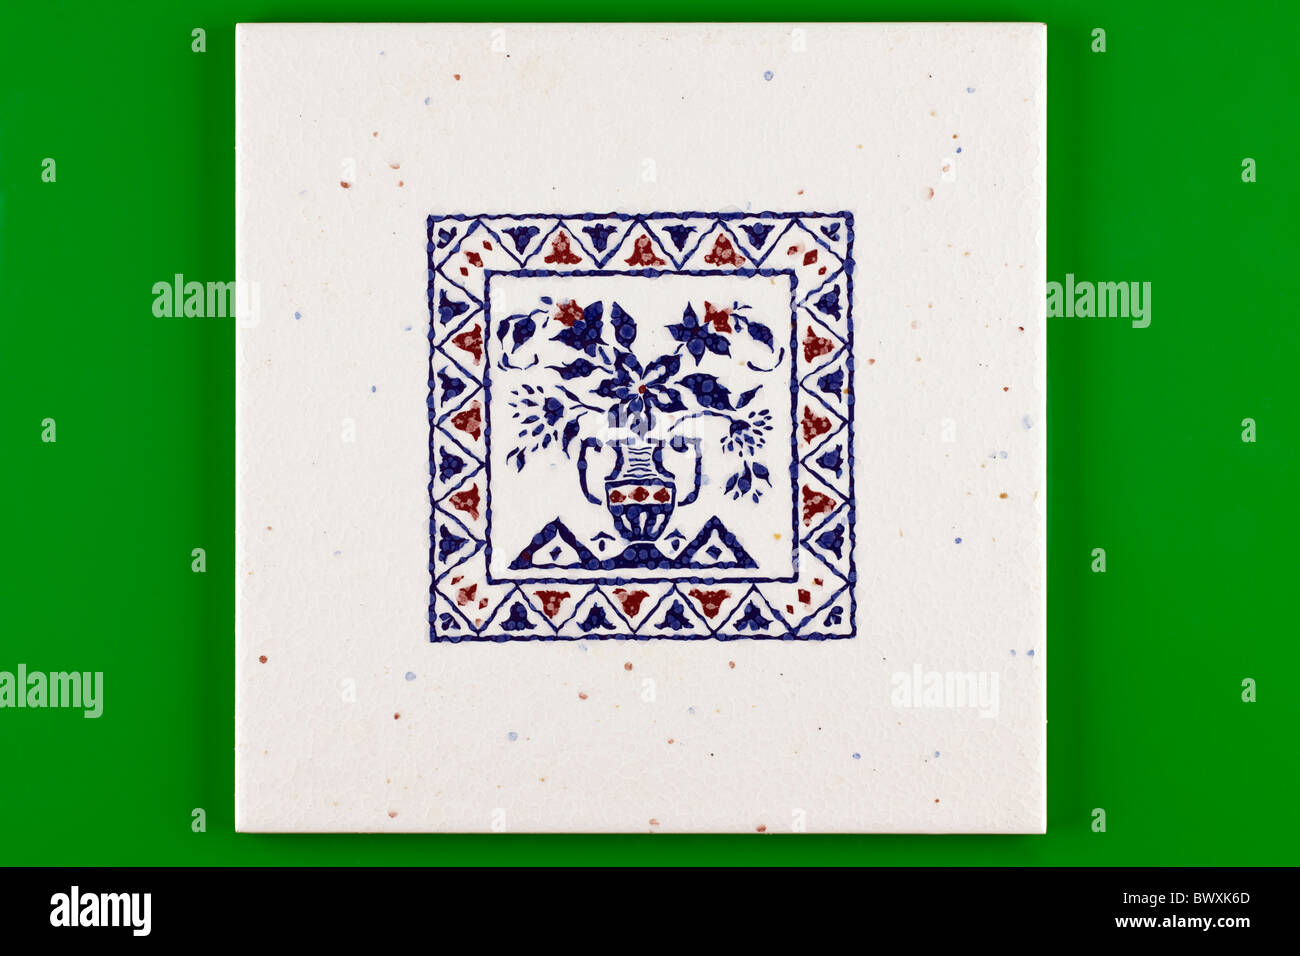 Blue and white pattered square ceramic tile on a green background Stock Photo